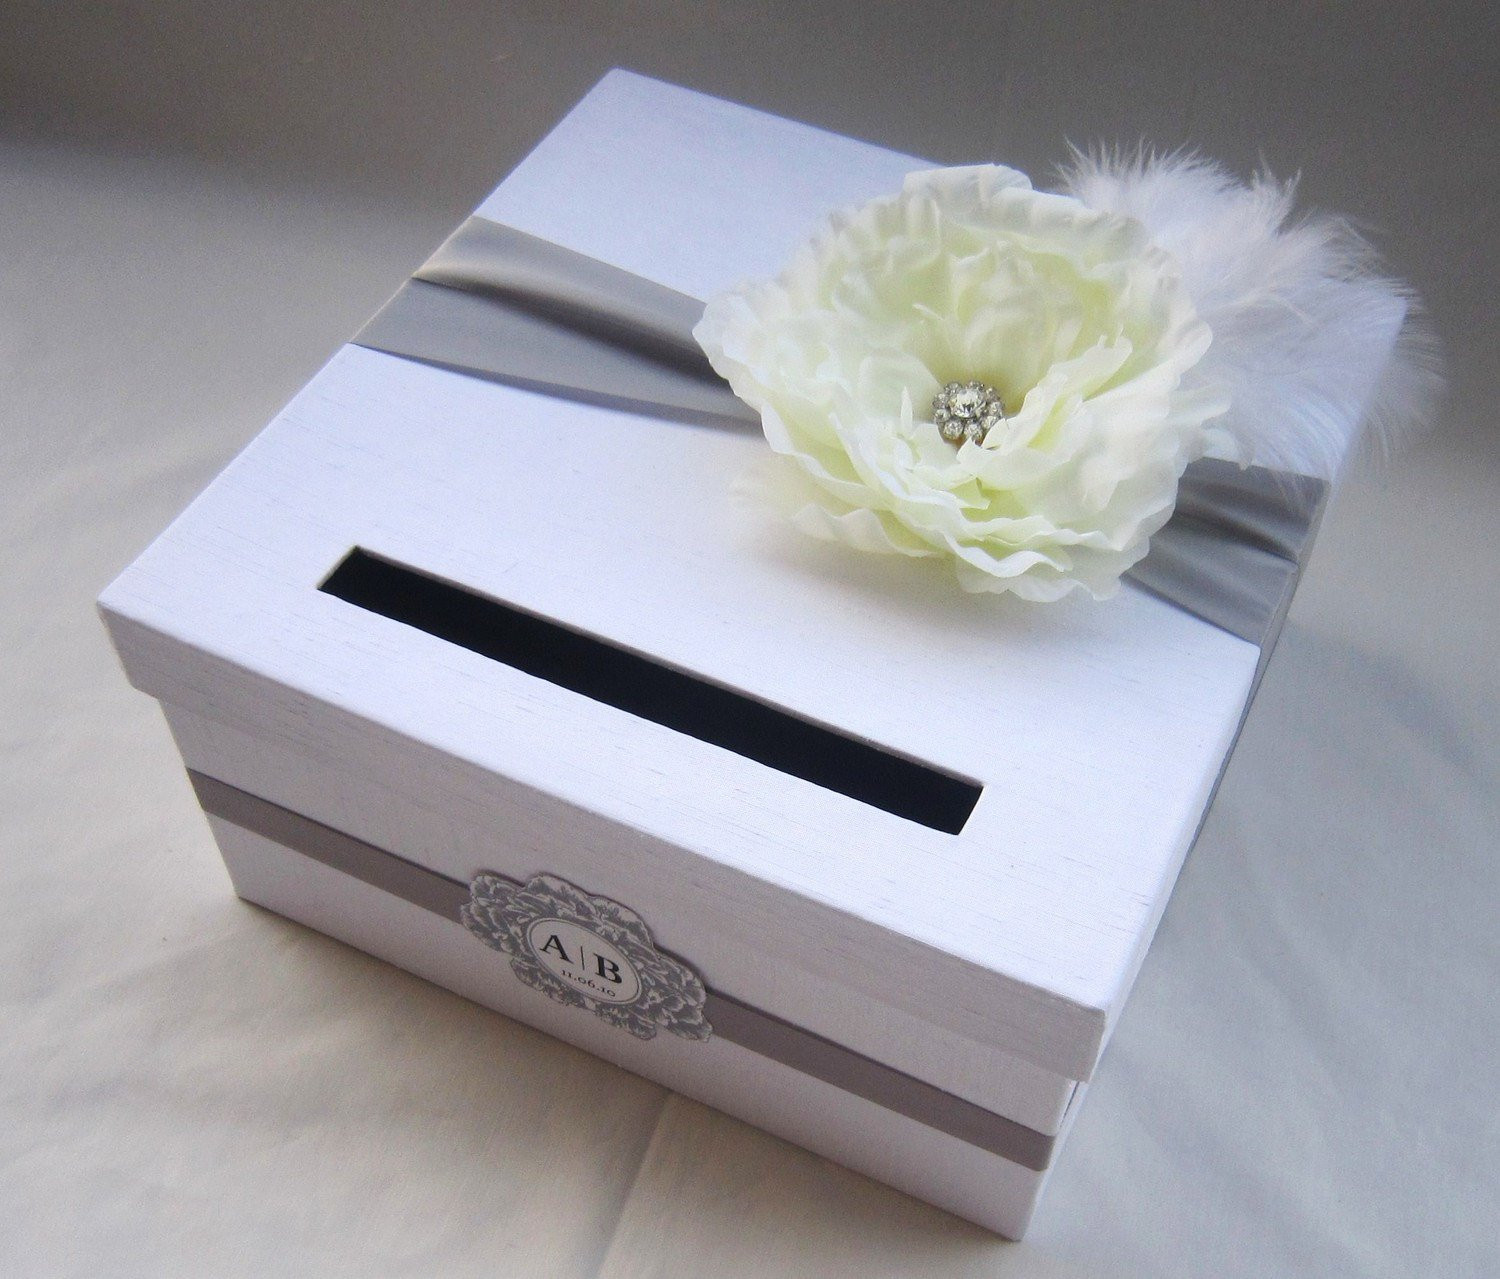 Best ideas about DIY Card Box
. Save or Pin WEDDING CARD BOX MONEY HOLDER CUSTOM MADE by Now.